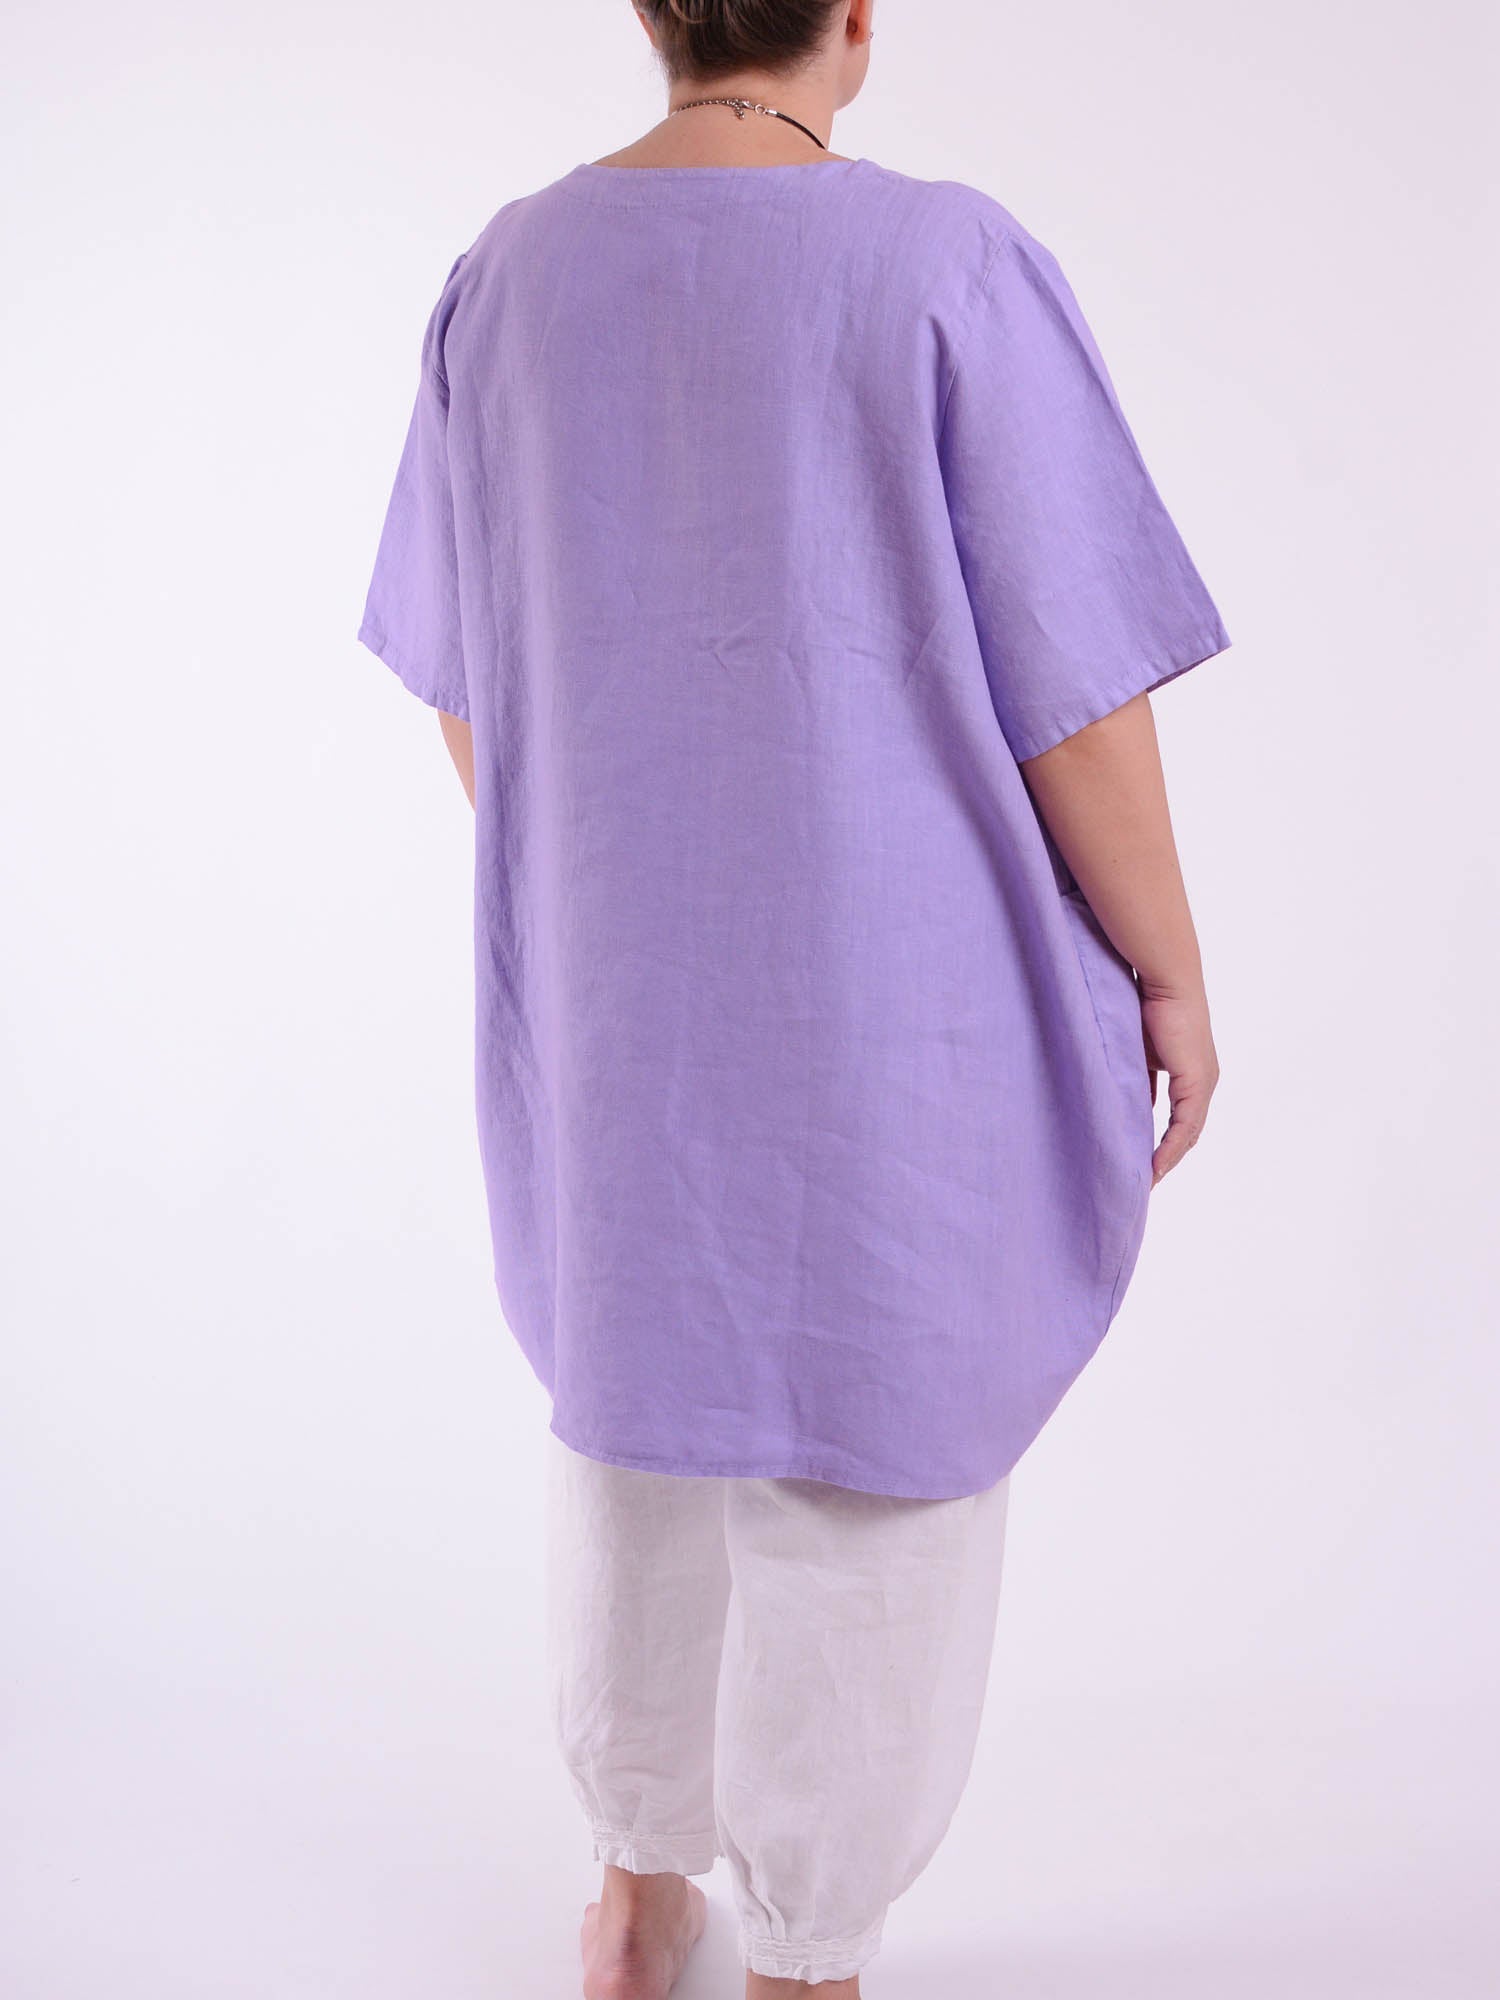 Heavy Linen Quirky Tunic Short Sleeve - 9457, Tops & Shirts, Pure Plus Clothing, Lagenlook Clothing, Plus Size Fashion, Over 50 Fashion